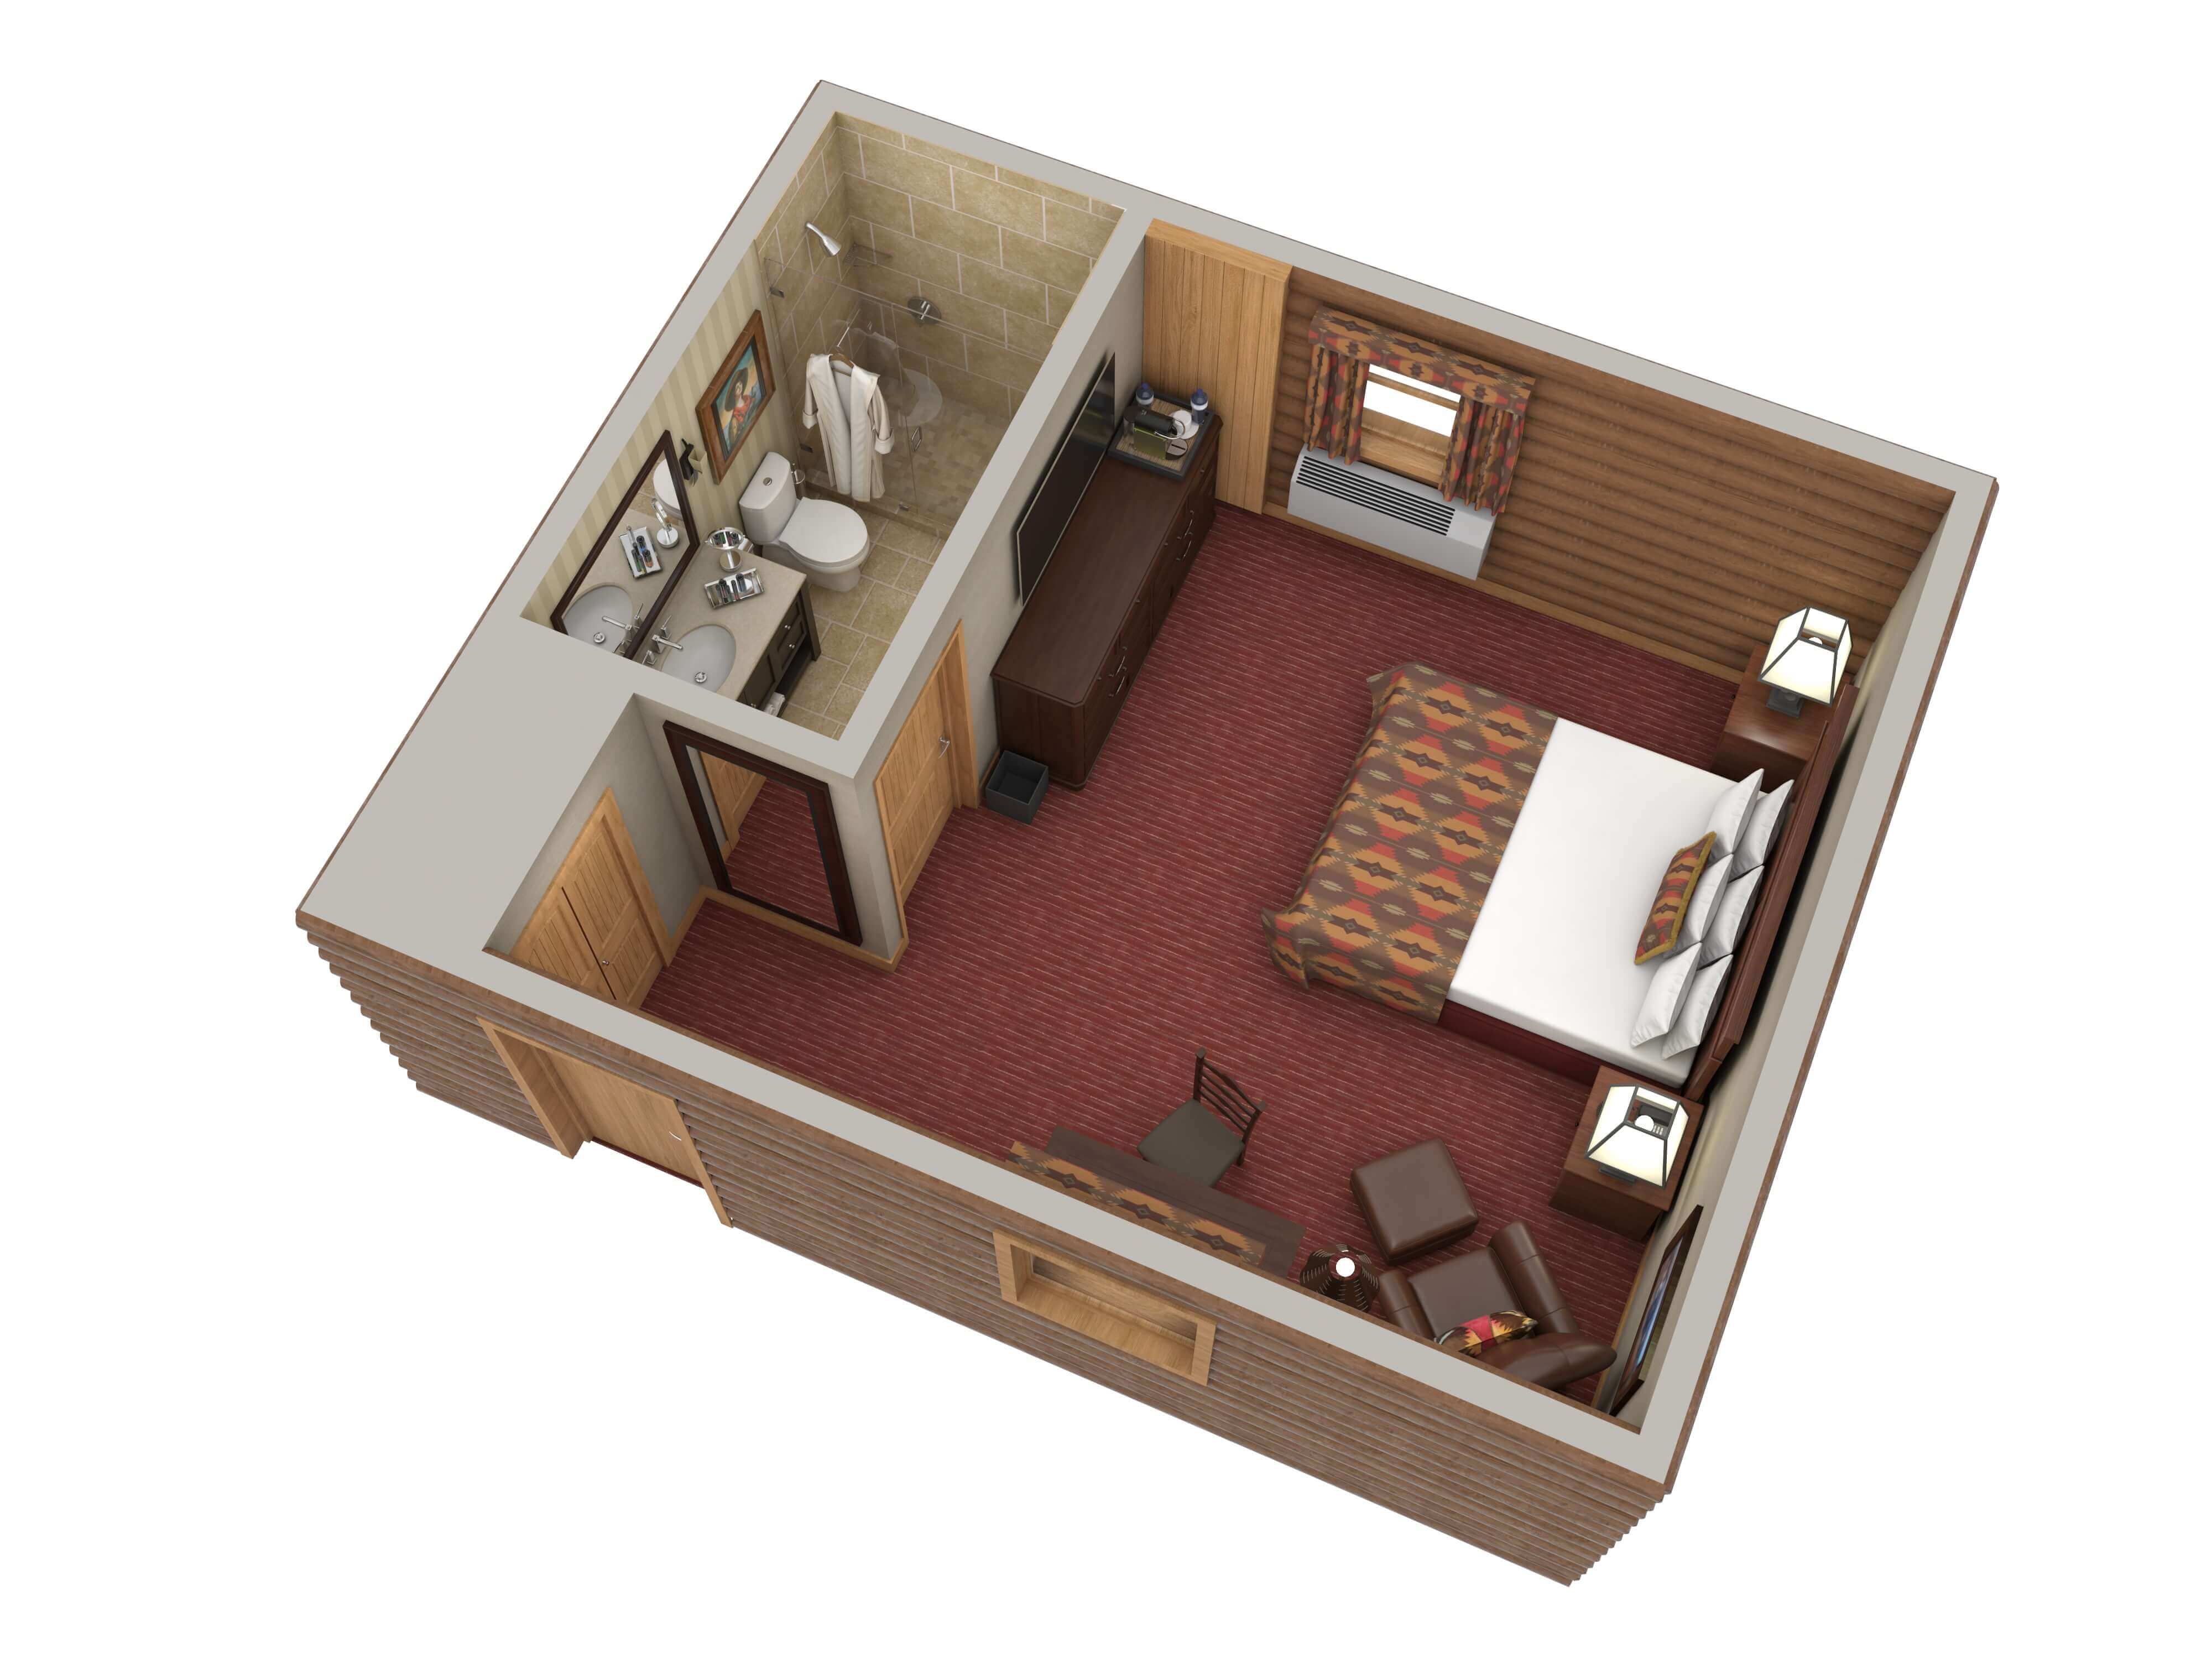 digital image of deluxe hotel room with king bed looking from above